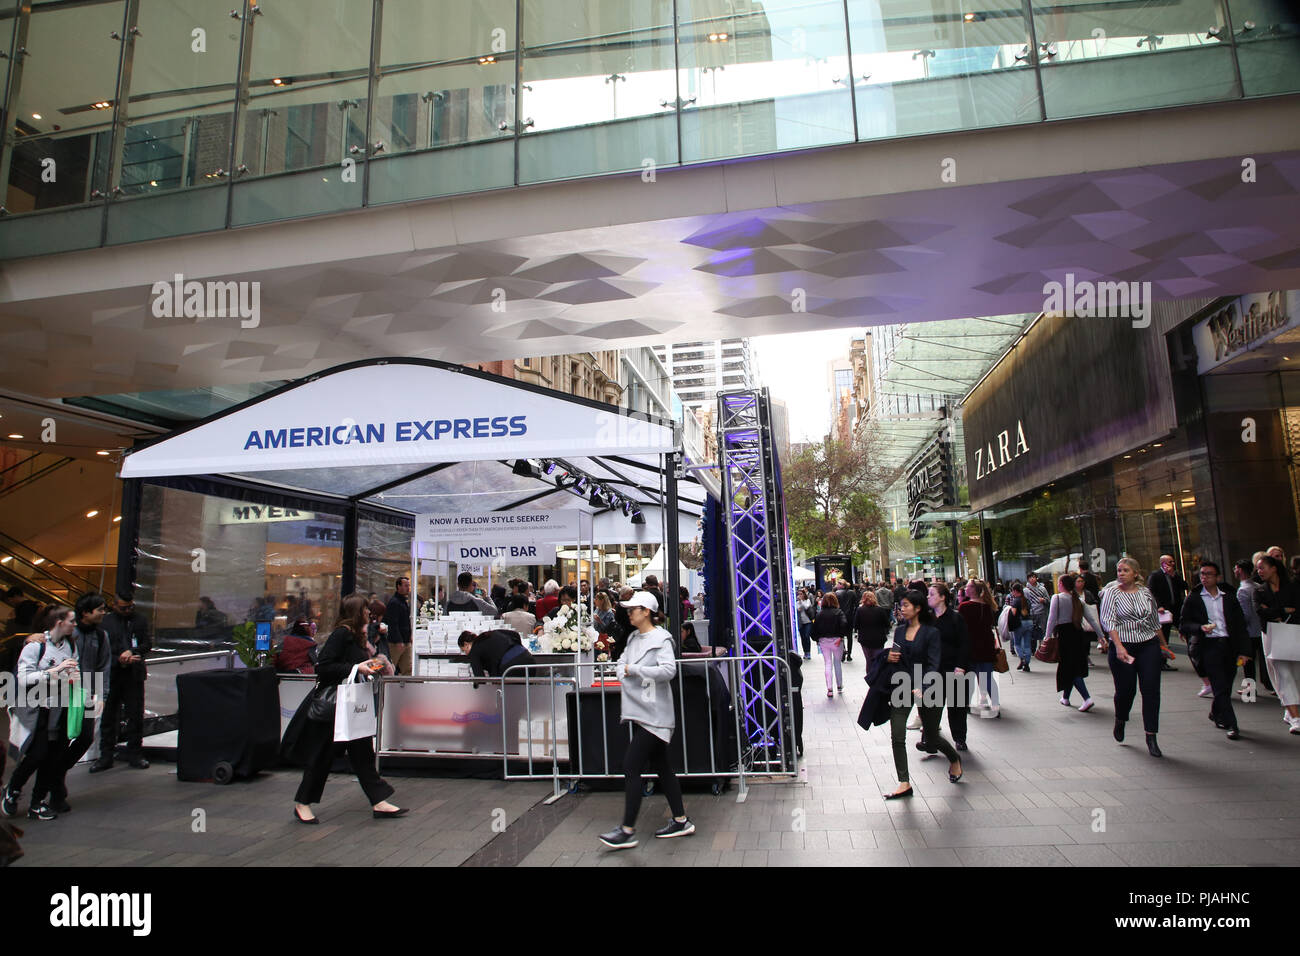 Sydney, Australia. 6 September 2018. Sydney CBD fashion retailers are set  for the world's biggest fashion and social shopping event, Vogue American  Express Fashion's Night Out (VAEFNO). Hundreds of thousands of shoppers